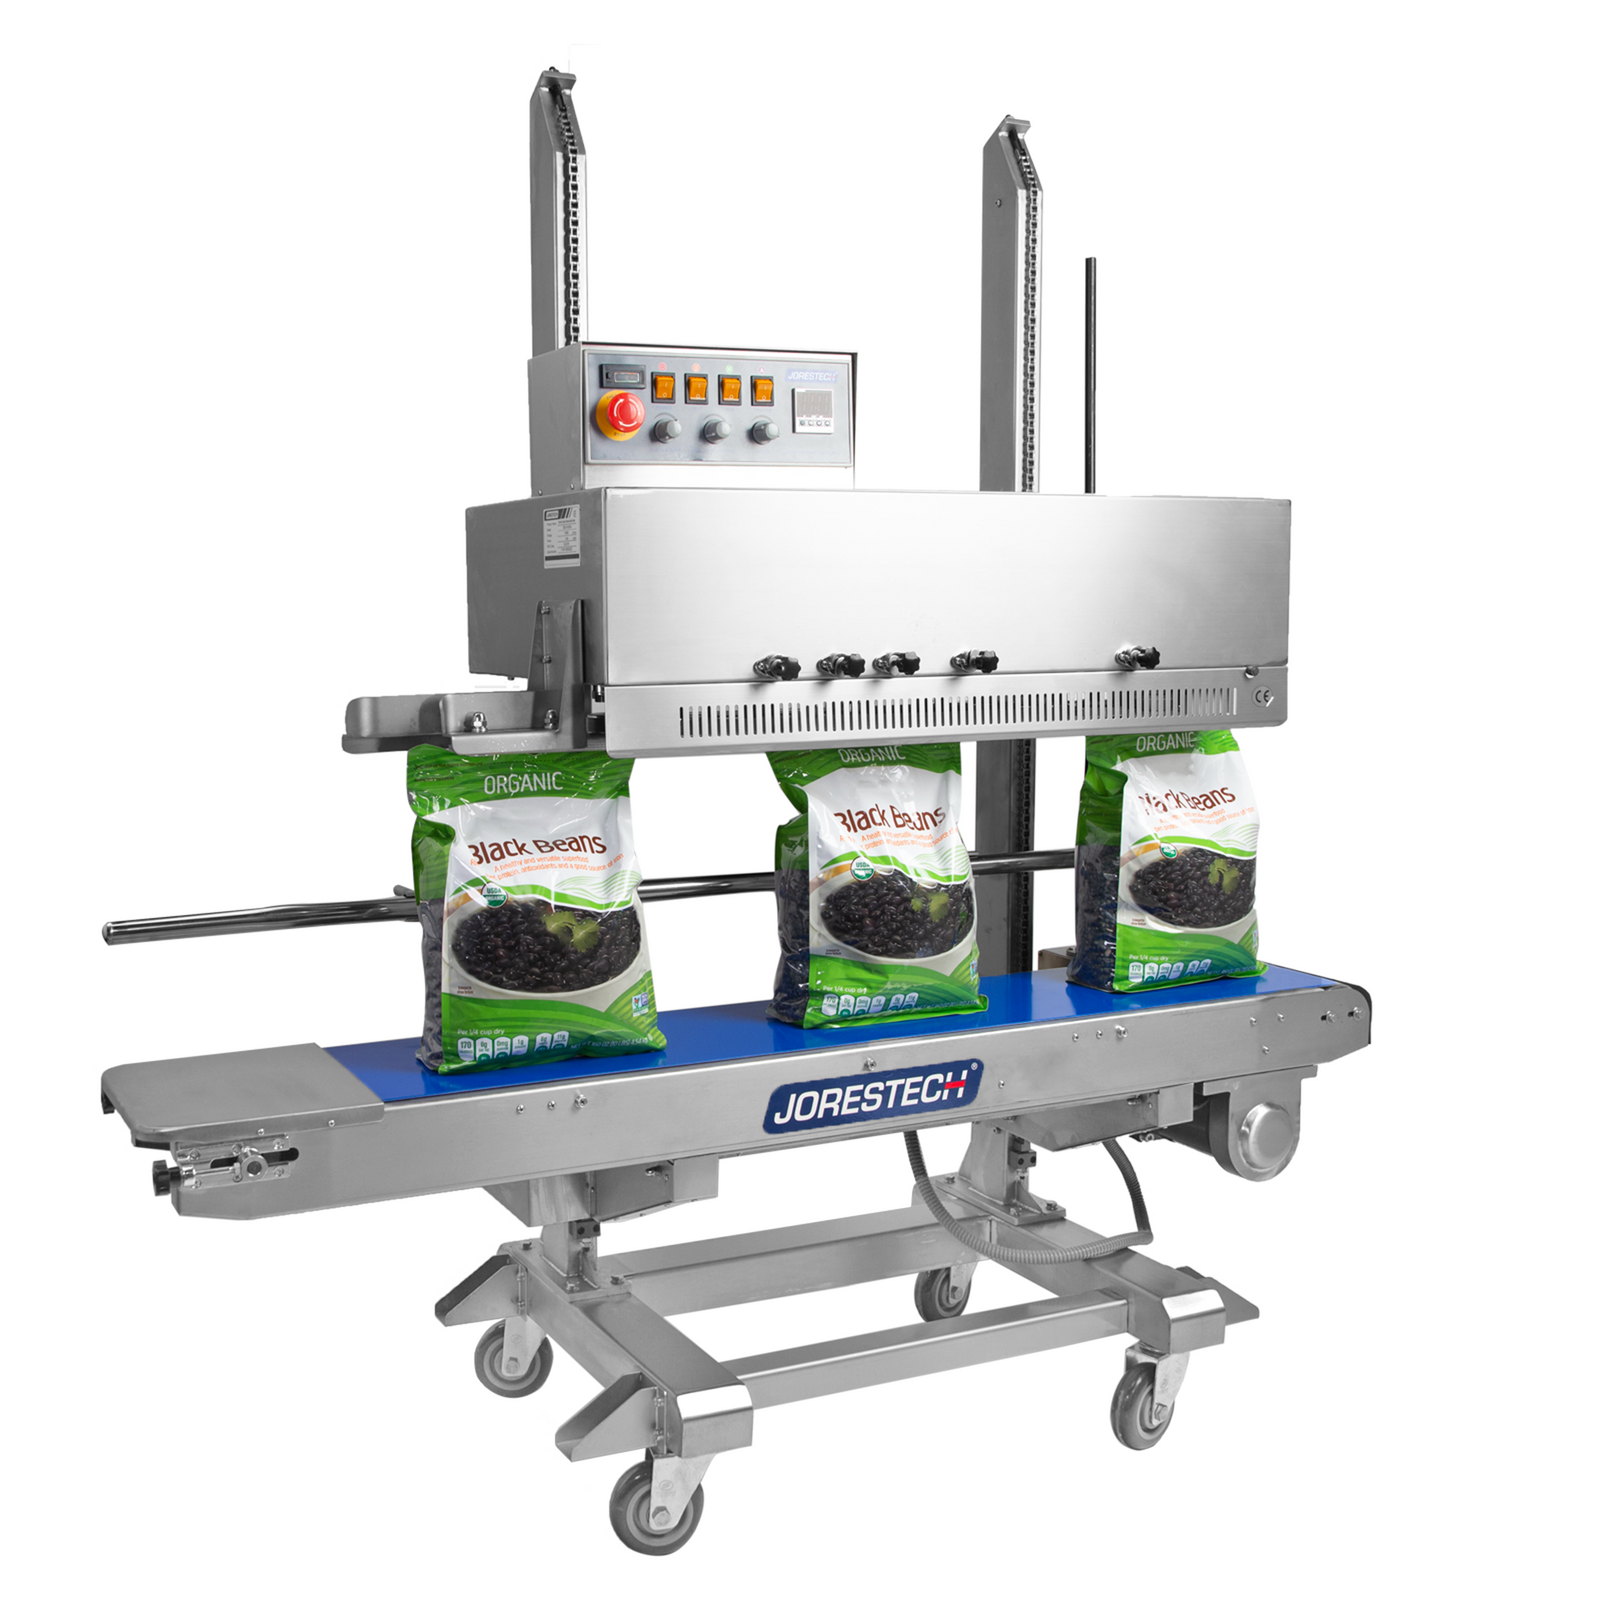 Stainless steel JORES TECHNOLOGIES® vertical left to right continuous band sealer with coder for large bags. Sealing a production of 5 lbs heat sealable bags filled with black beans